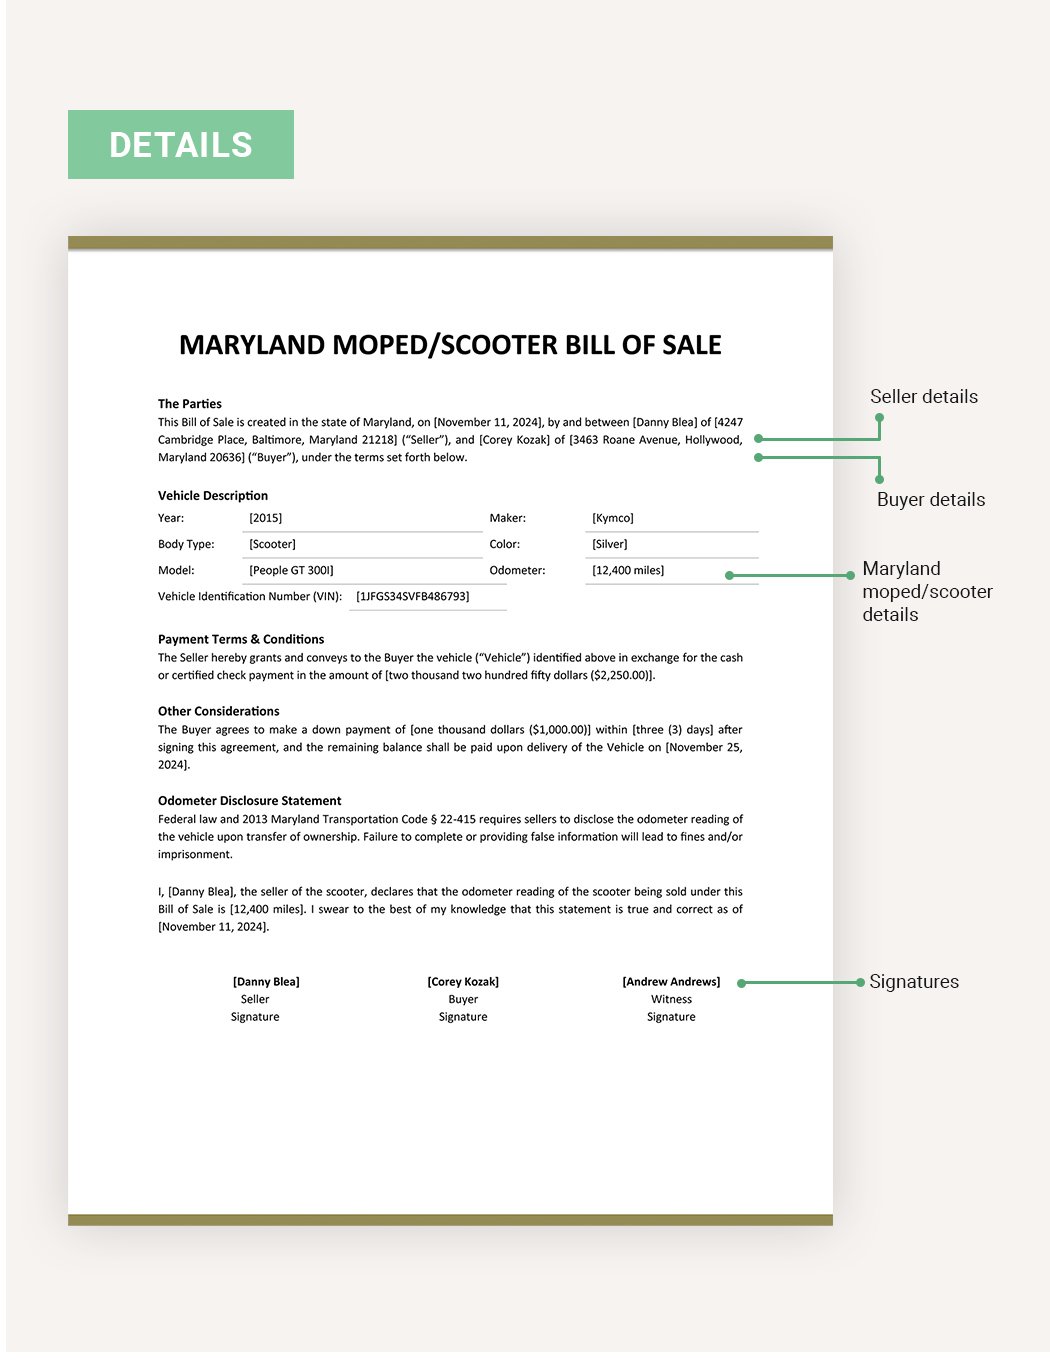 maryland-moped-scooter-bill-of-sale-template-download-in-word